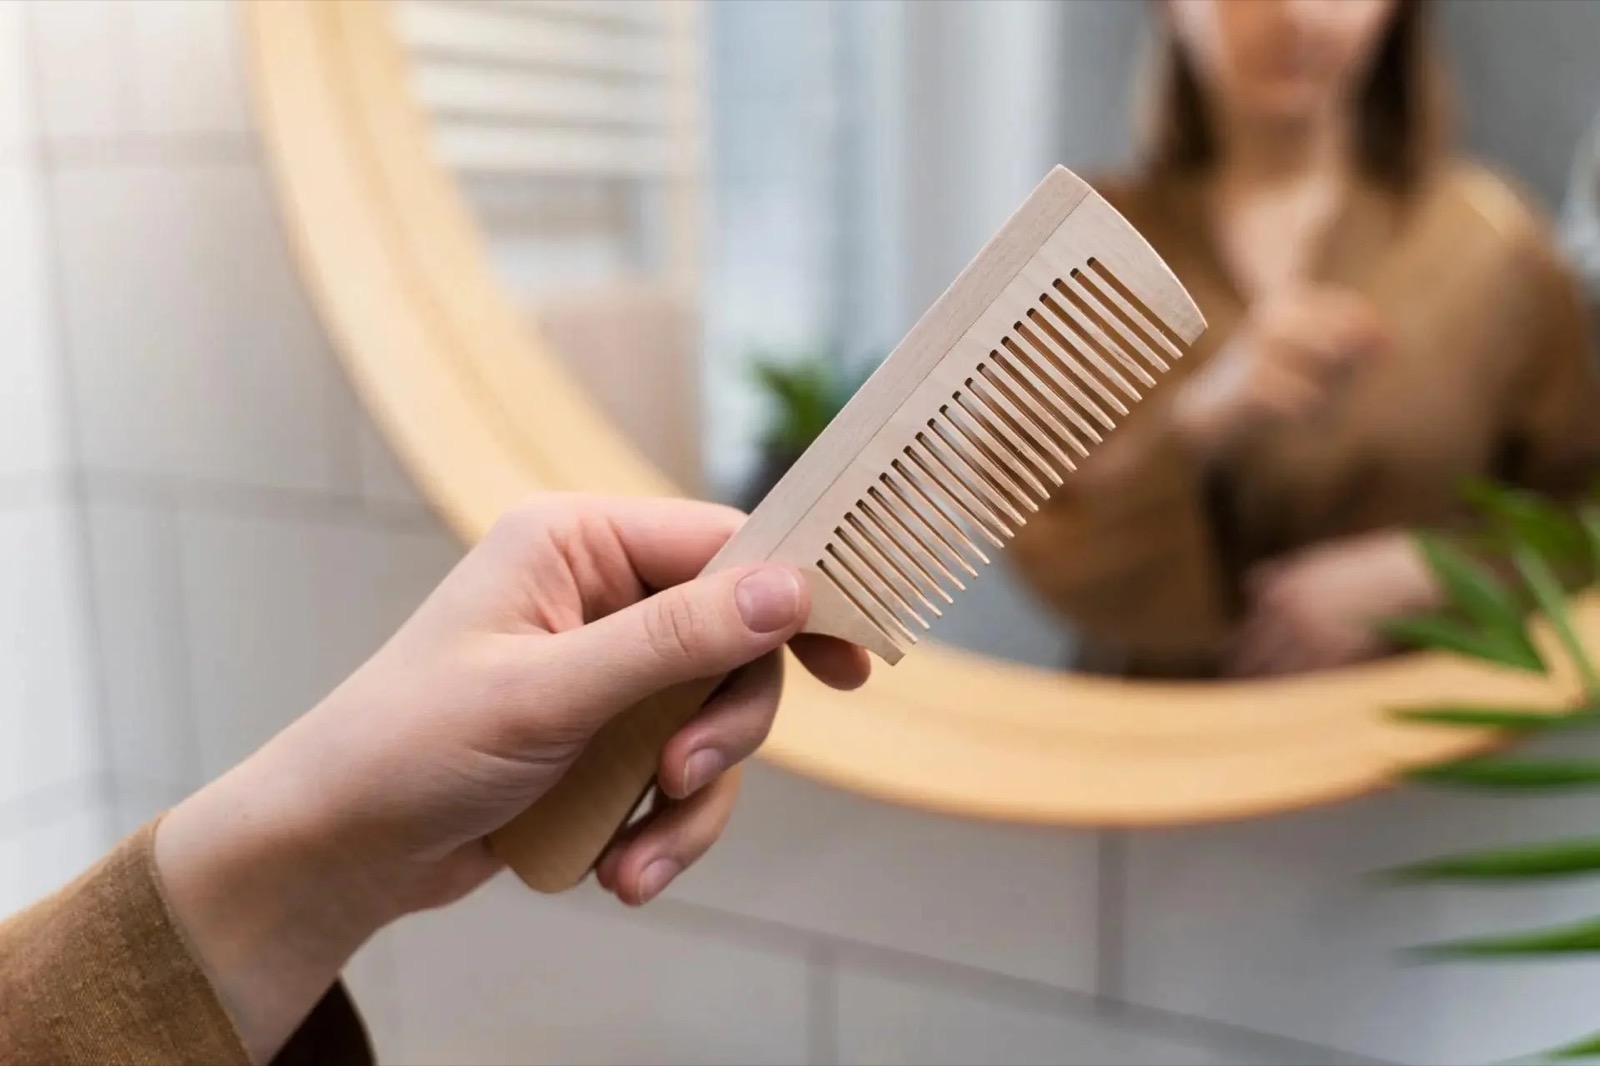 Do You Actually Know The Official Names Of These Everyday Items? Comb